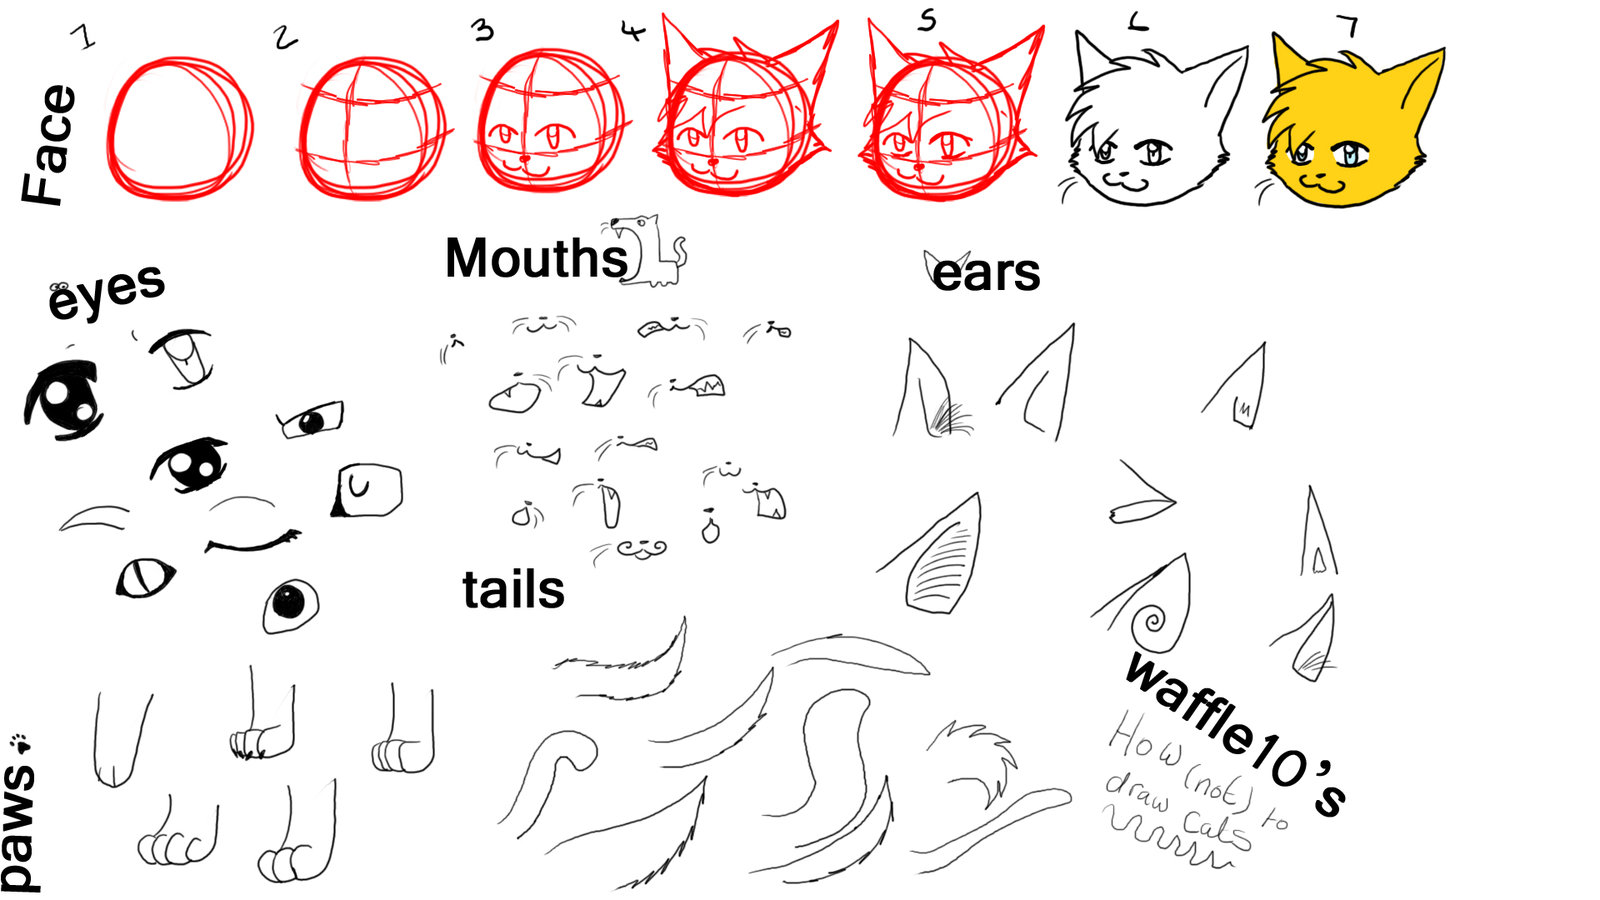 How to draw those anime cats by waffle10 on DeviantArt